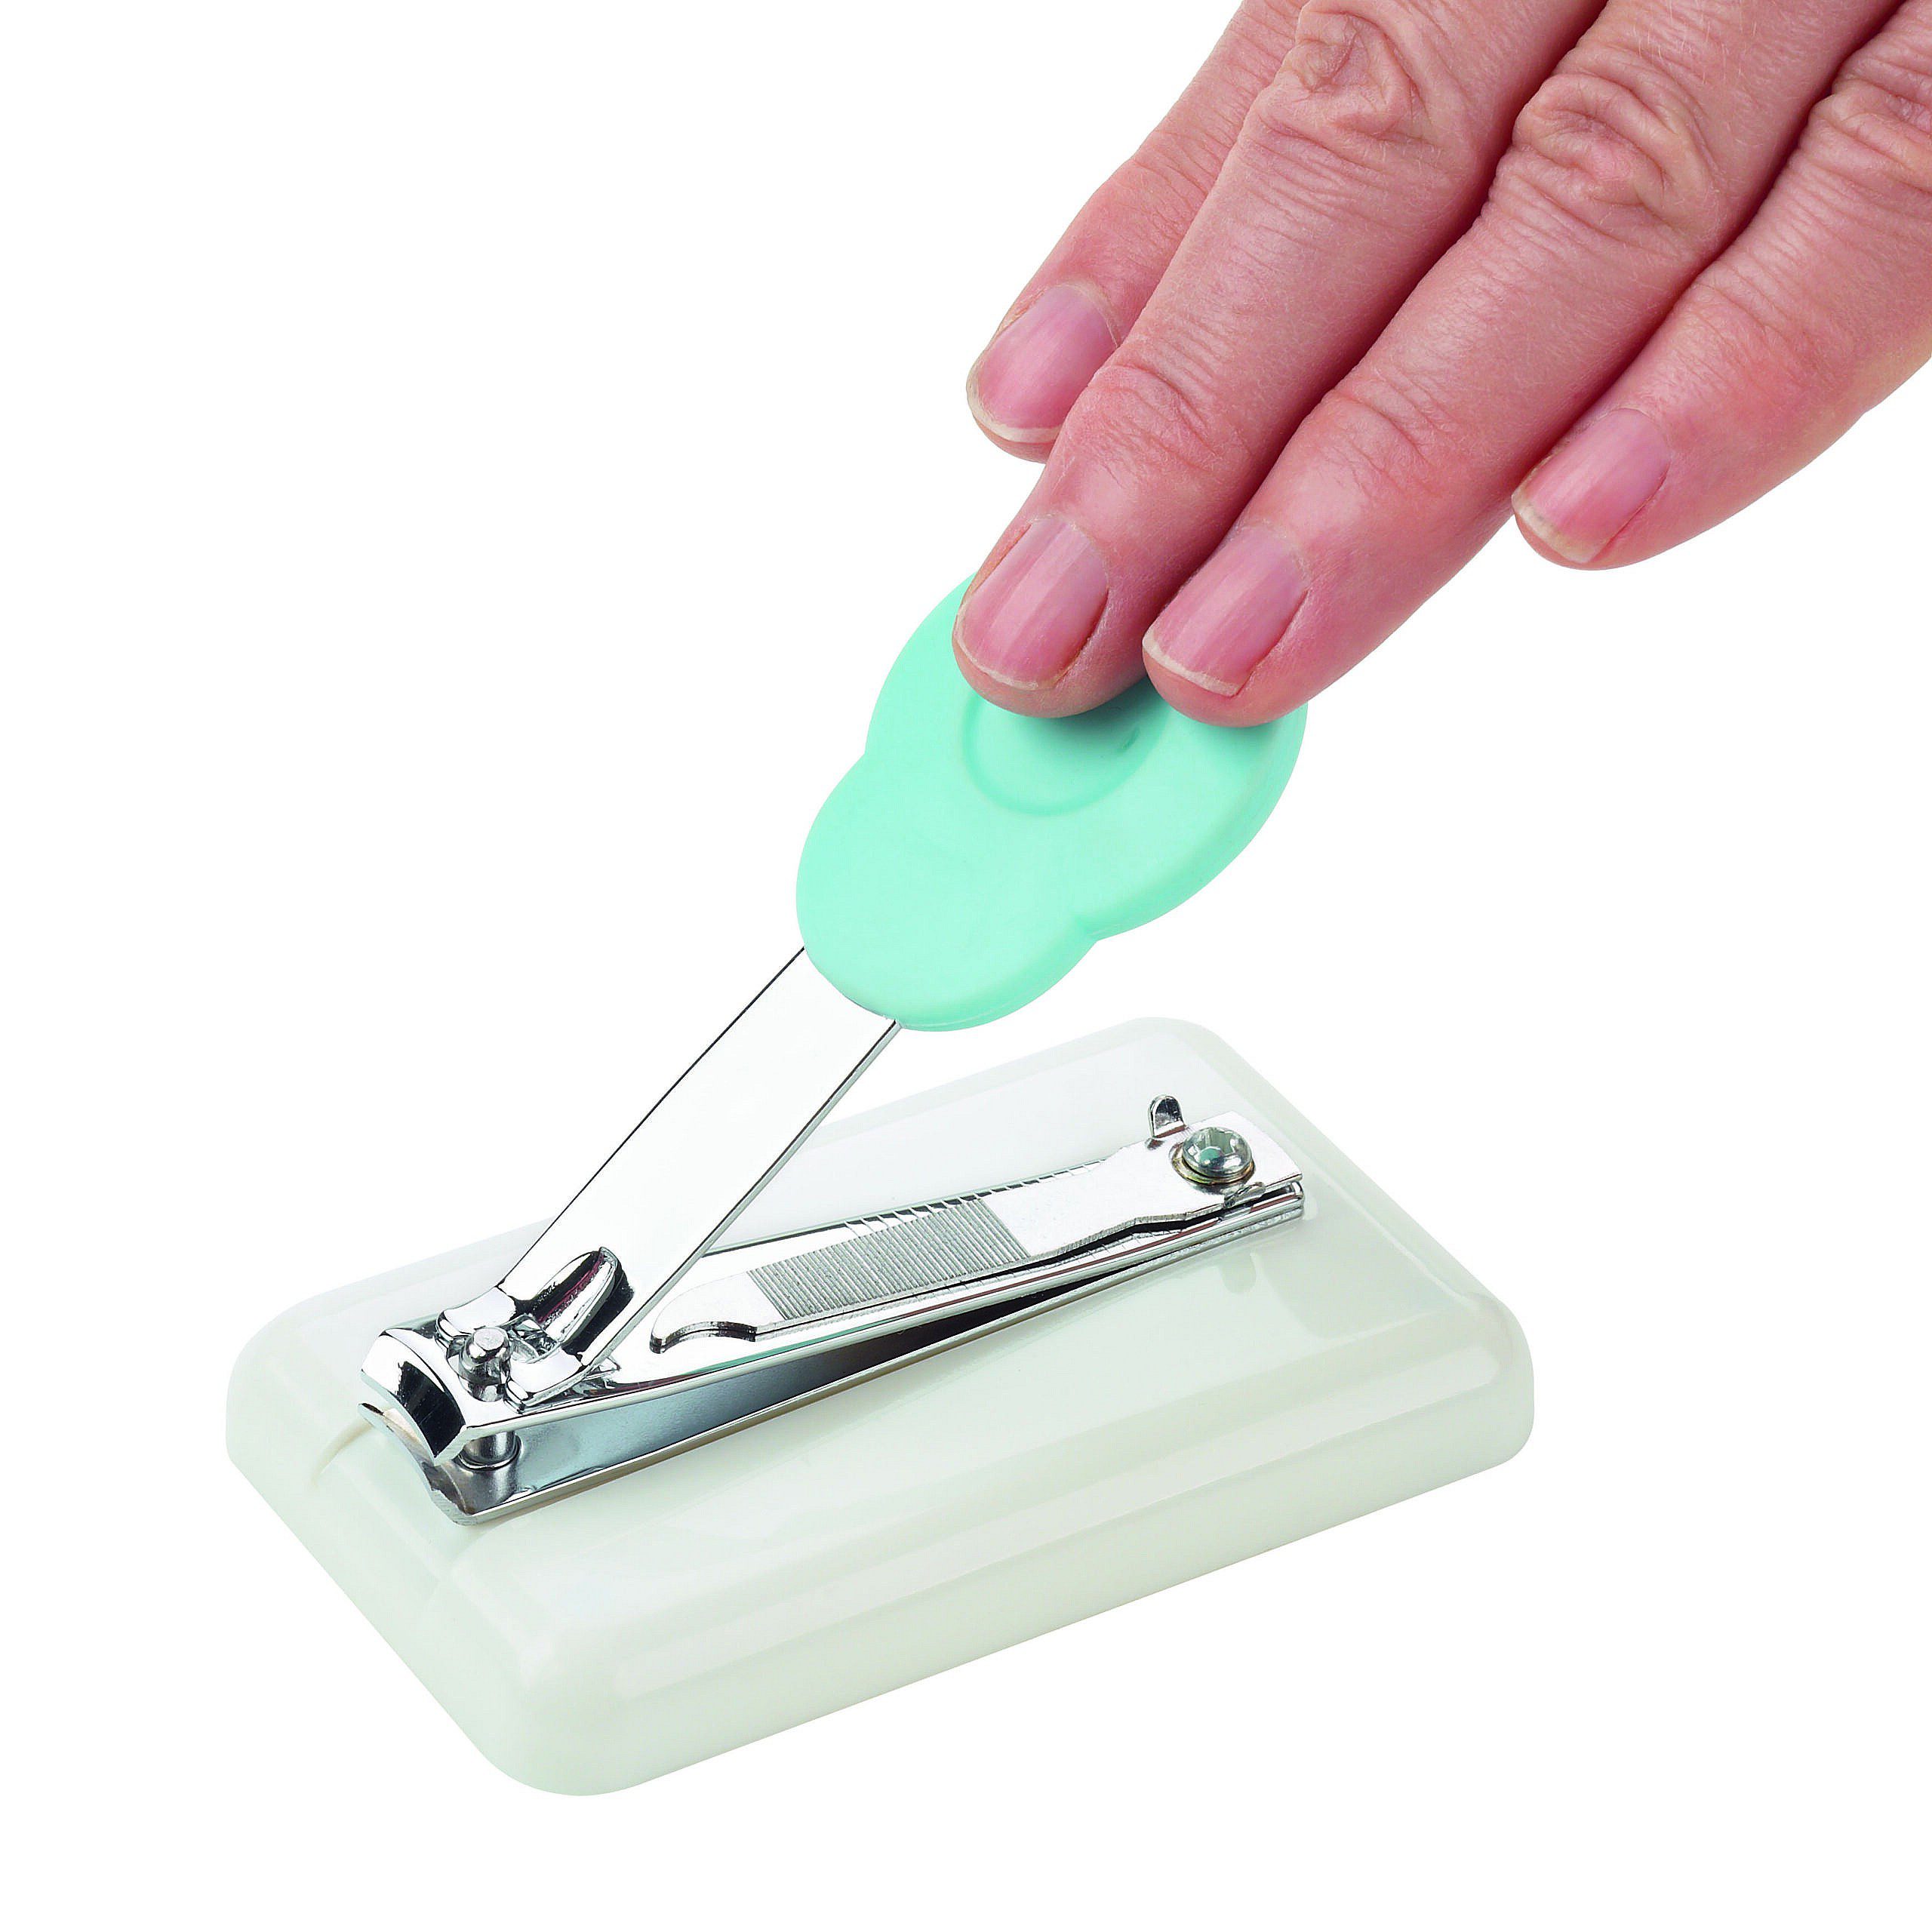 Sturdy Wholesale Nail Cutter Set For All Finger And Toenails - Alibaba.com-thanhphatduhoc.com.vn